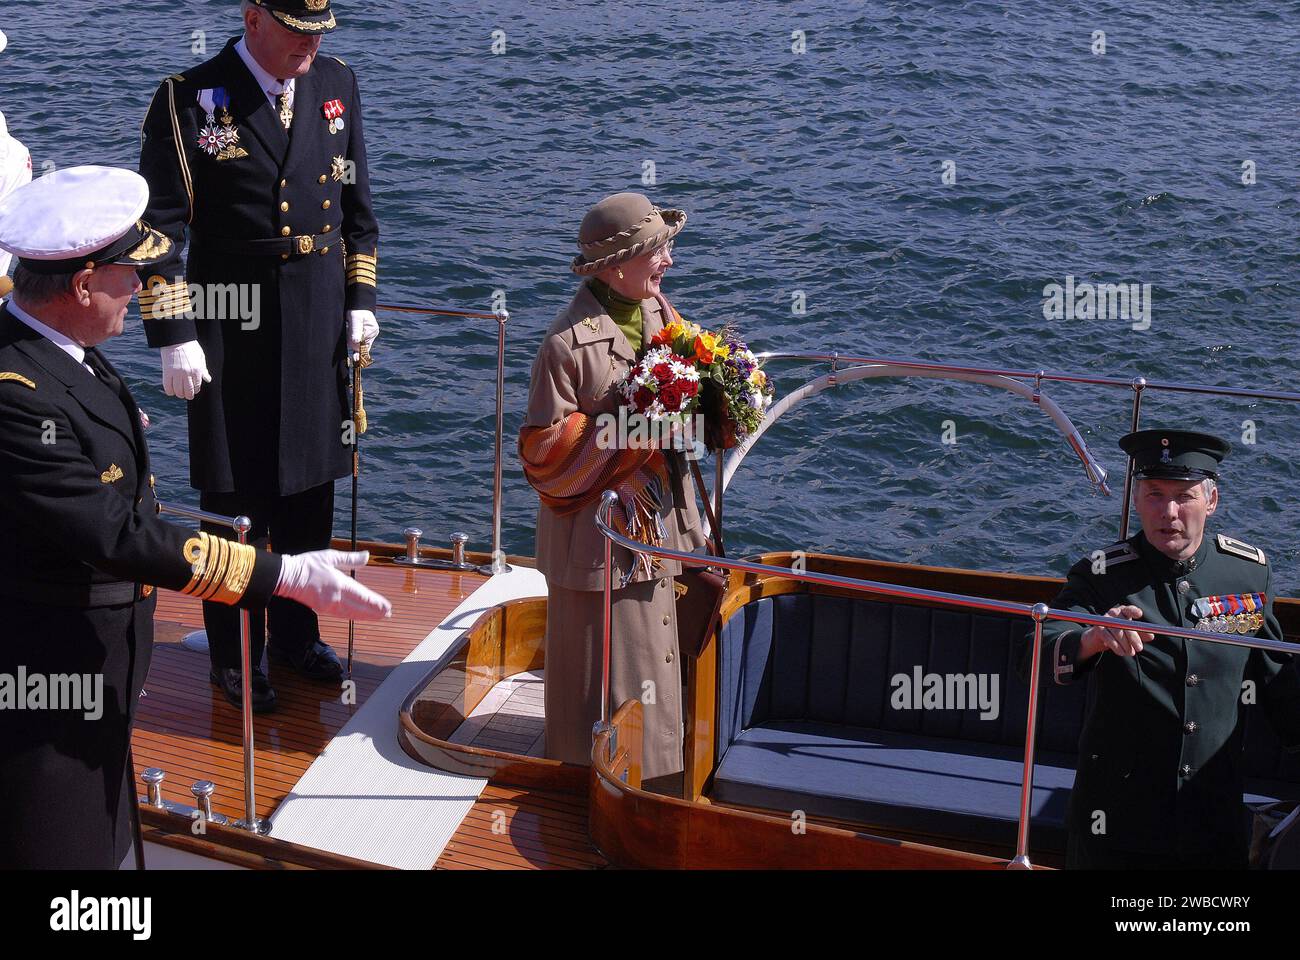 HM the Queen Margrethe II and husband prince Hnerik official on board Royal ship Danneborg as usual each year and royal couple will sail from Copenhagen to Hillingoer city and have lunch on ship today Friday April 28,2006 Copenhagen Denmark Stock Photo